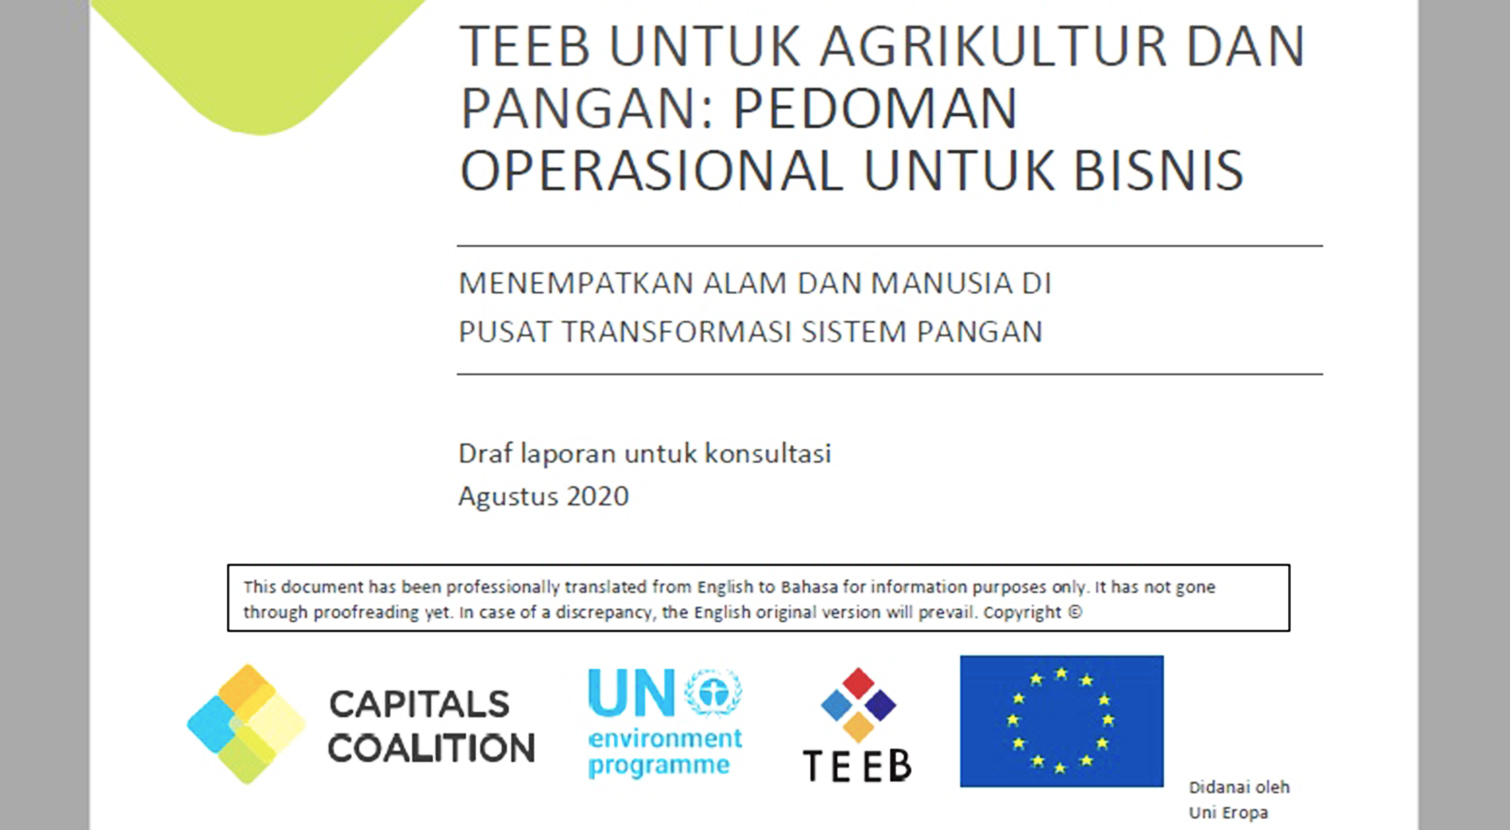 IBCSD TEEBAgriFood Operational Guidelines for Business Publication